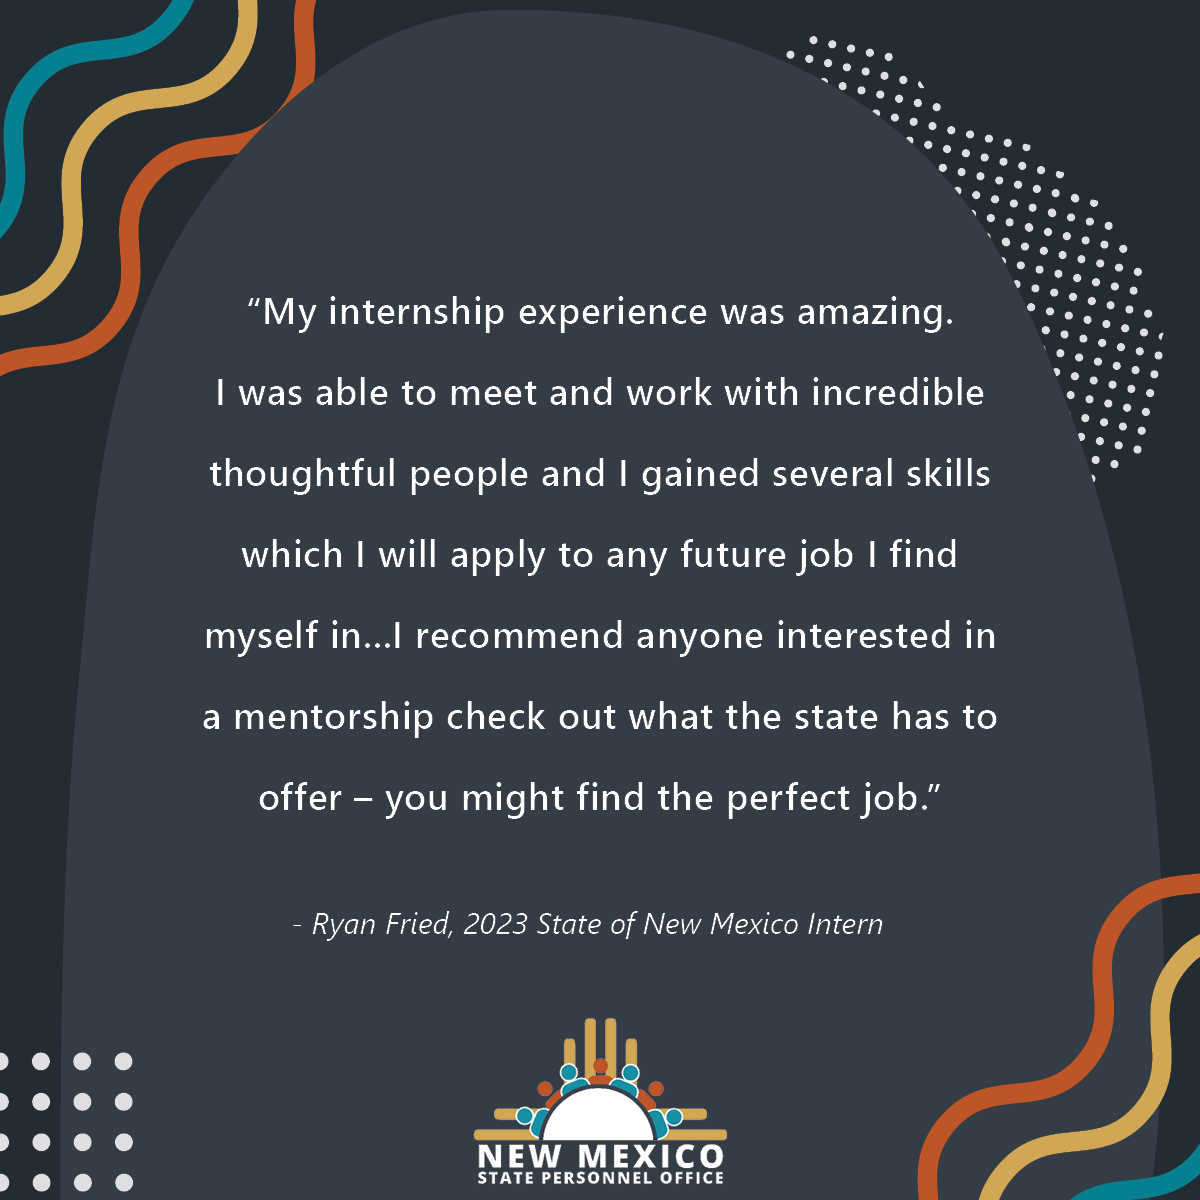 "My internship experience was amazing. I<br />
was able to meet and work with incredible thoughtful<br />
people and I gained several skills which I will apply to<br />
any future job I find myself in...I recommend anyone<br />
interested in a mentorship check out what the state has<br />
to offer – you might find the perfect job.” - Ryan Fried,<br />
2023 State of New Mexico Intern